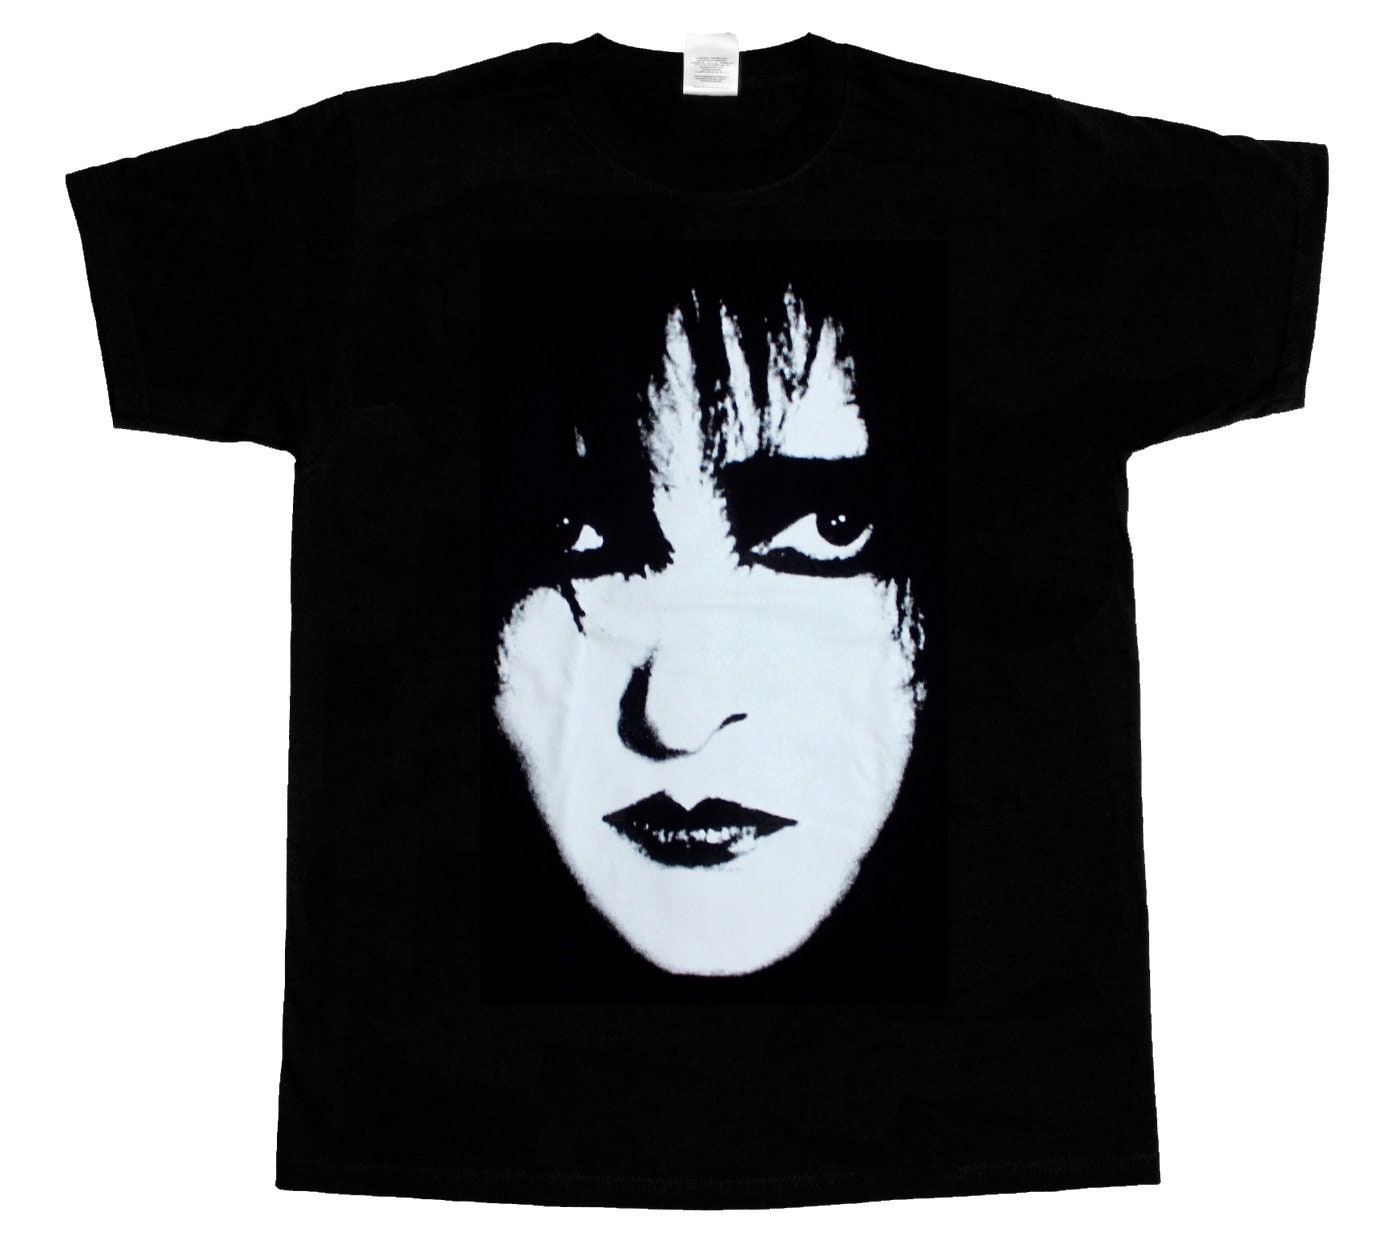 siouxsie and the banshees sioux face post punk gothic t-shirt